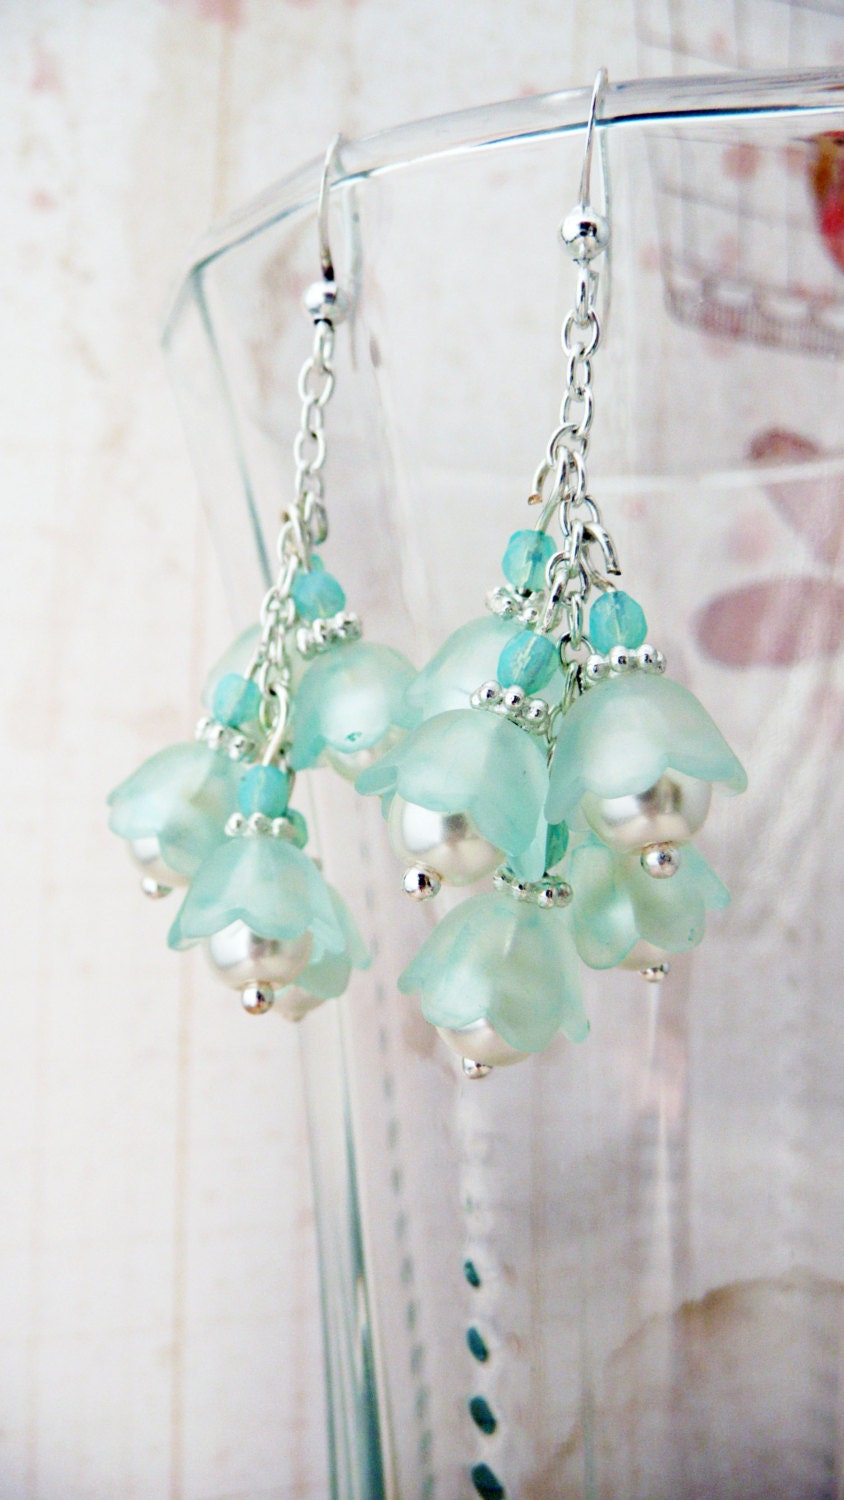 seaglass blue/green and silver lucite flower dangle earrings No. 279 - VerdigrisGifts